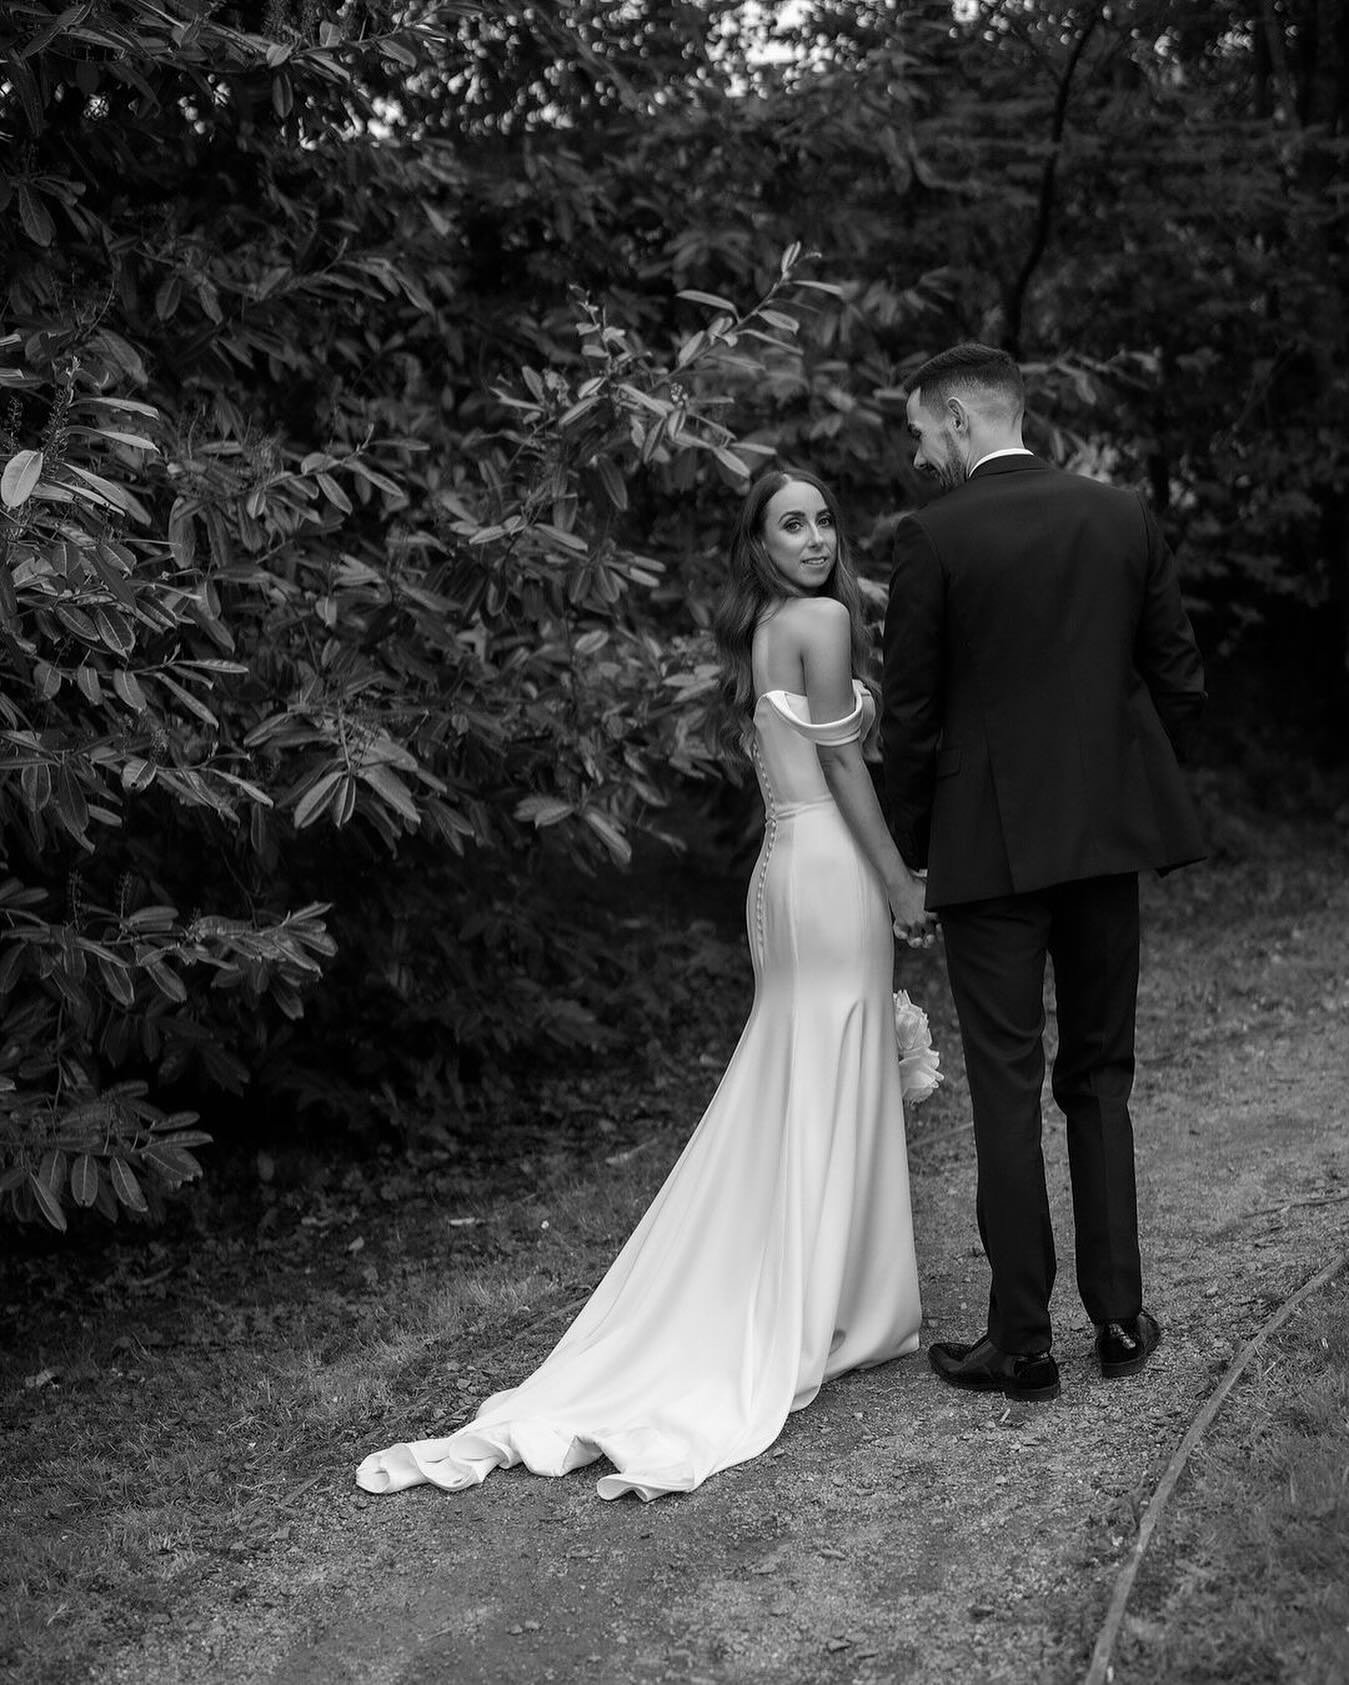 Sending Love + Happiness to Aisling 🤍 Aisling looking stunning in style Ripley 🤍 @petticoatlanebridal .
.
&bull; @petticoatlanebridal We are obsessed with Aisling&rsquo;s modern look at her  recent @killeavycastle wedding 🔥

Dream dress by @fredab